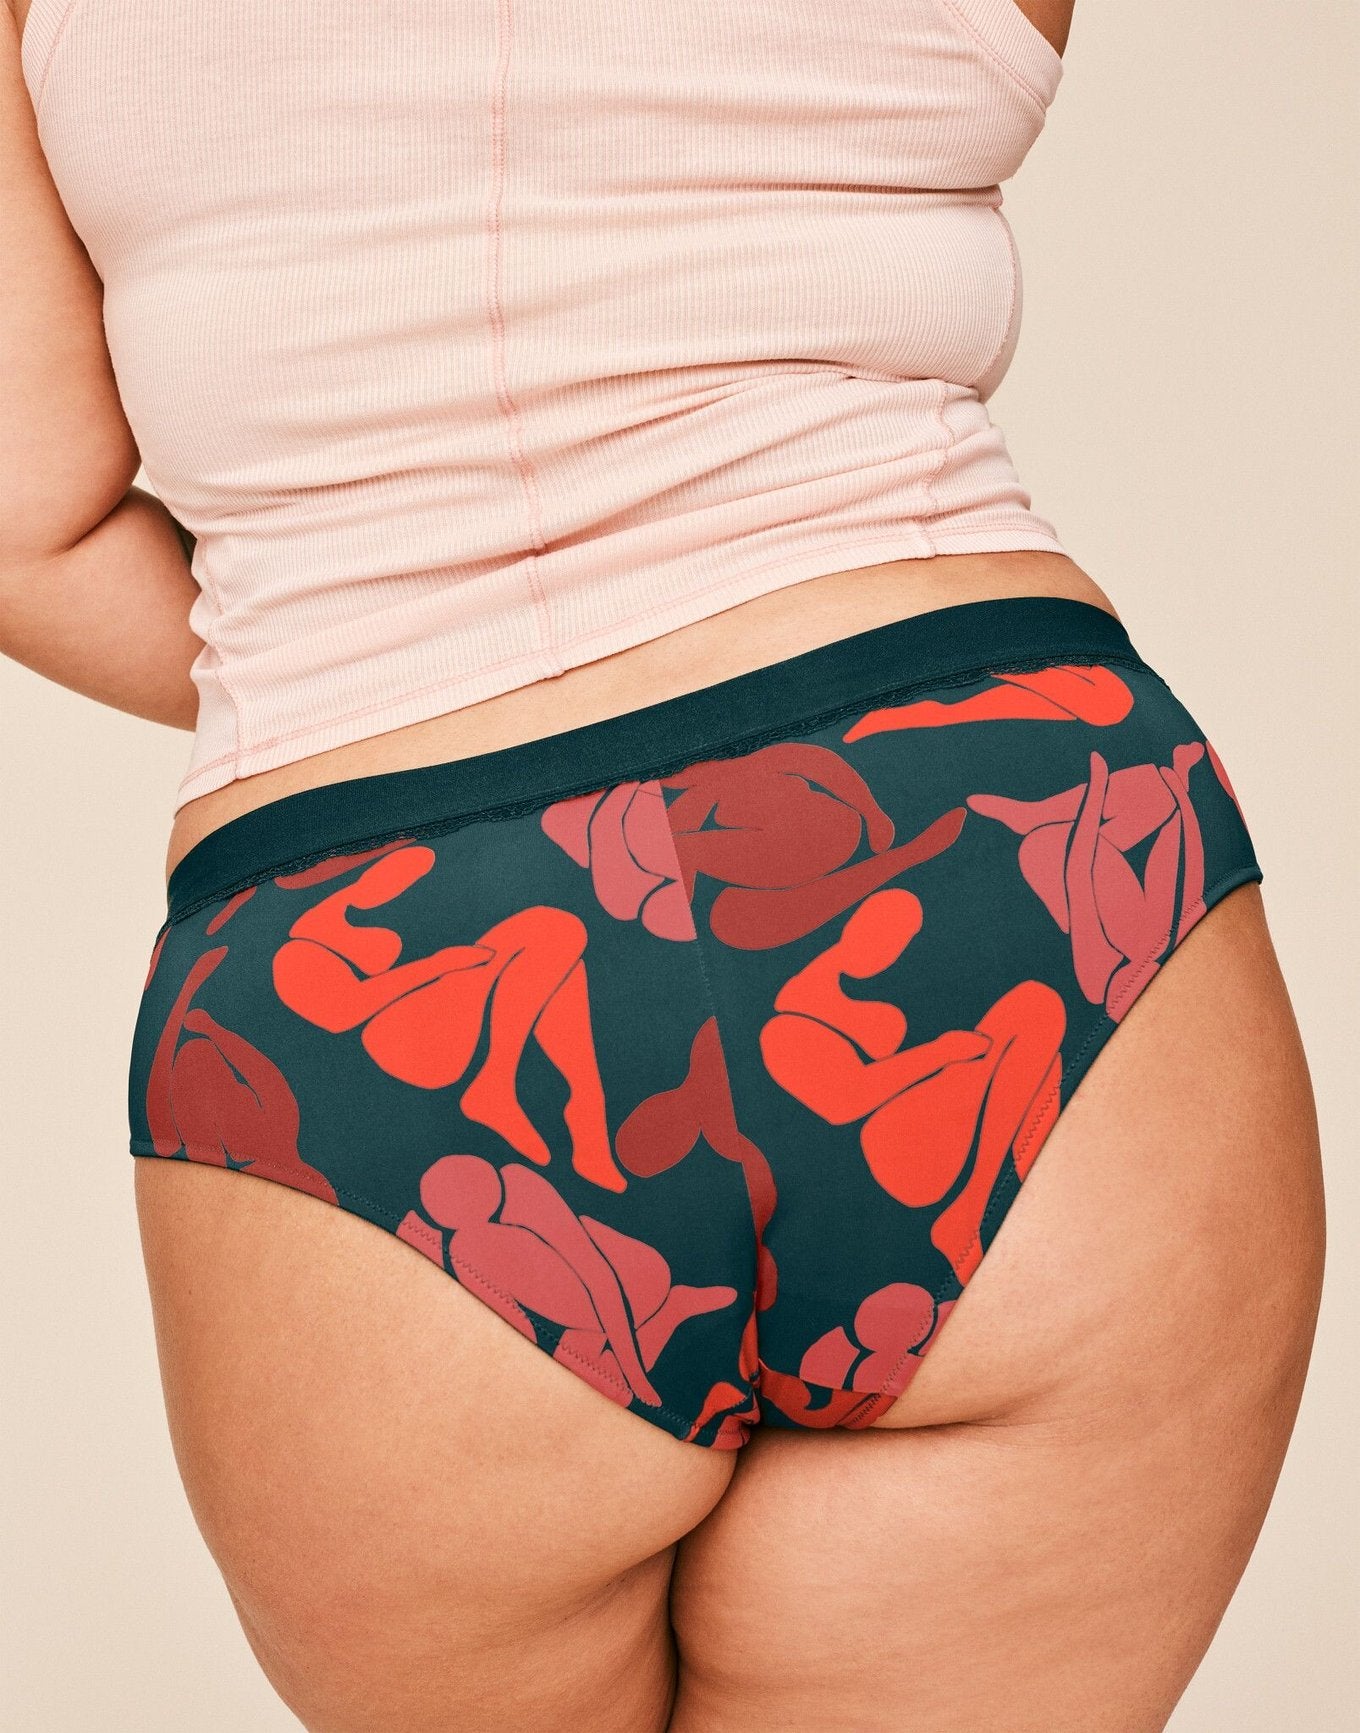 Women's sophisticated panties by Corin made in Poland –